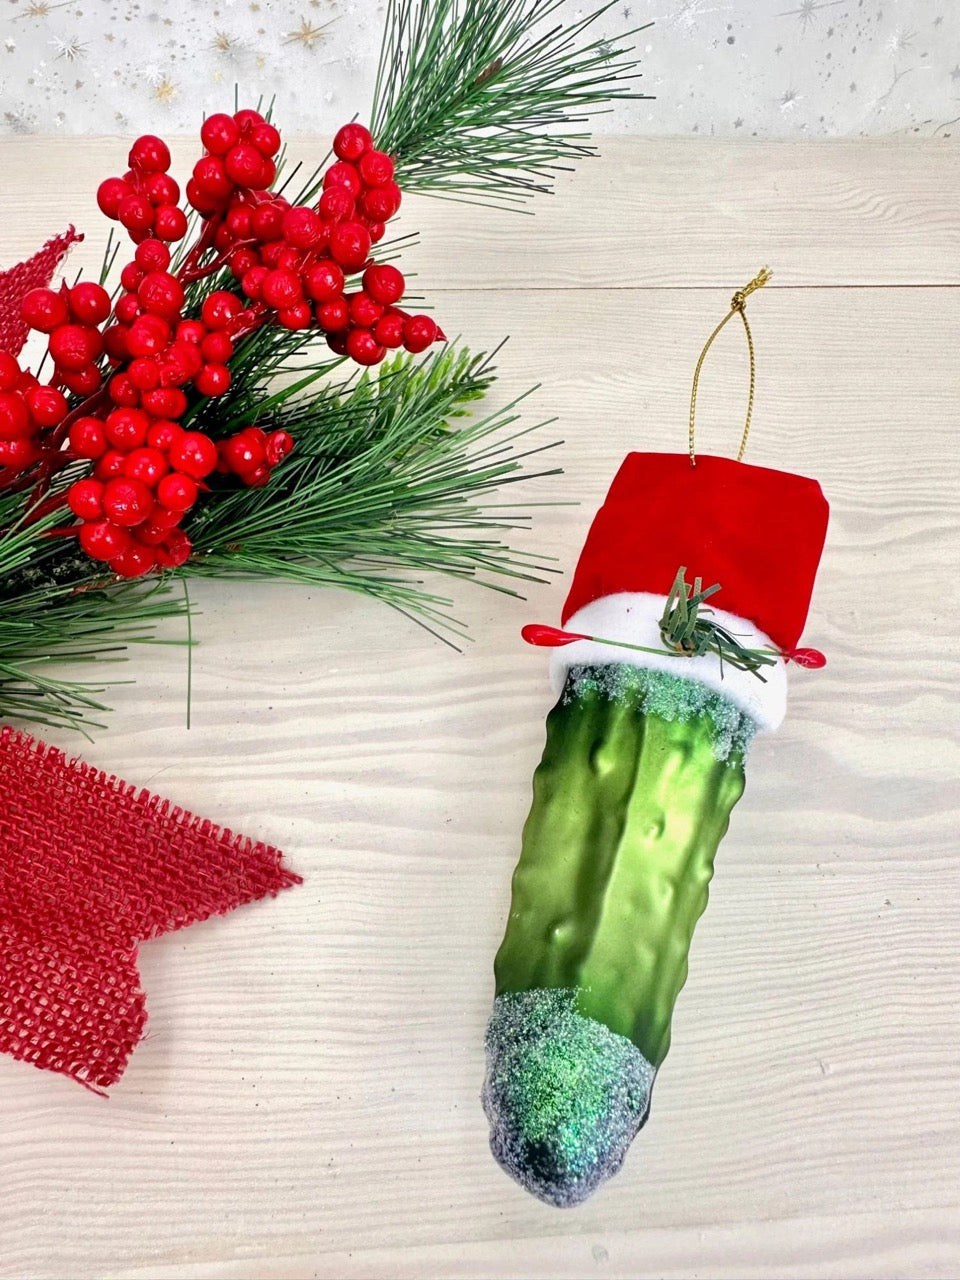 The History of the Christmas Pickle